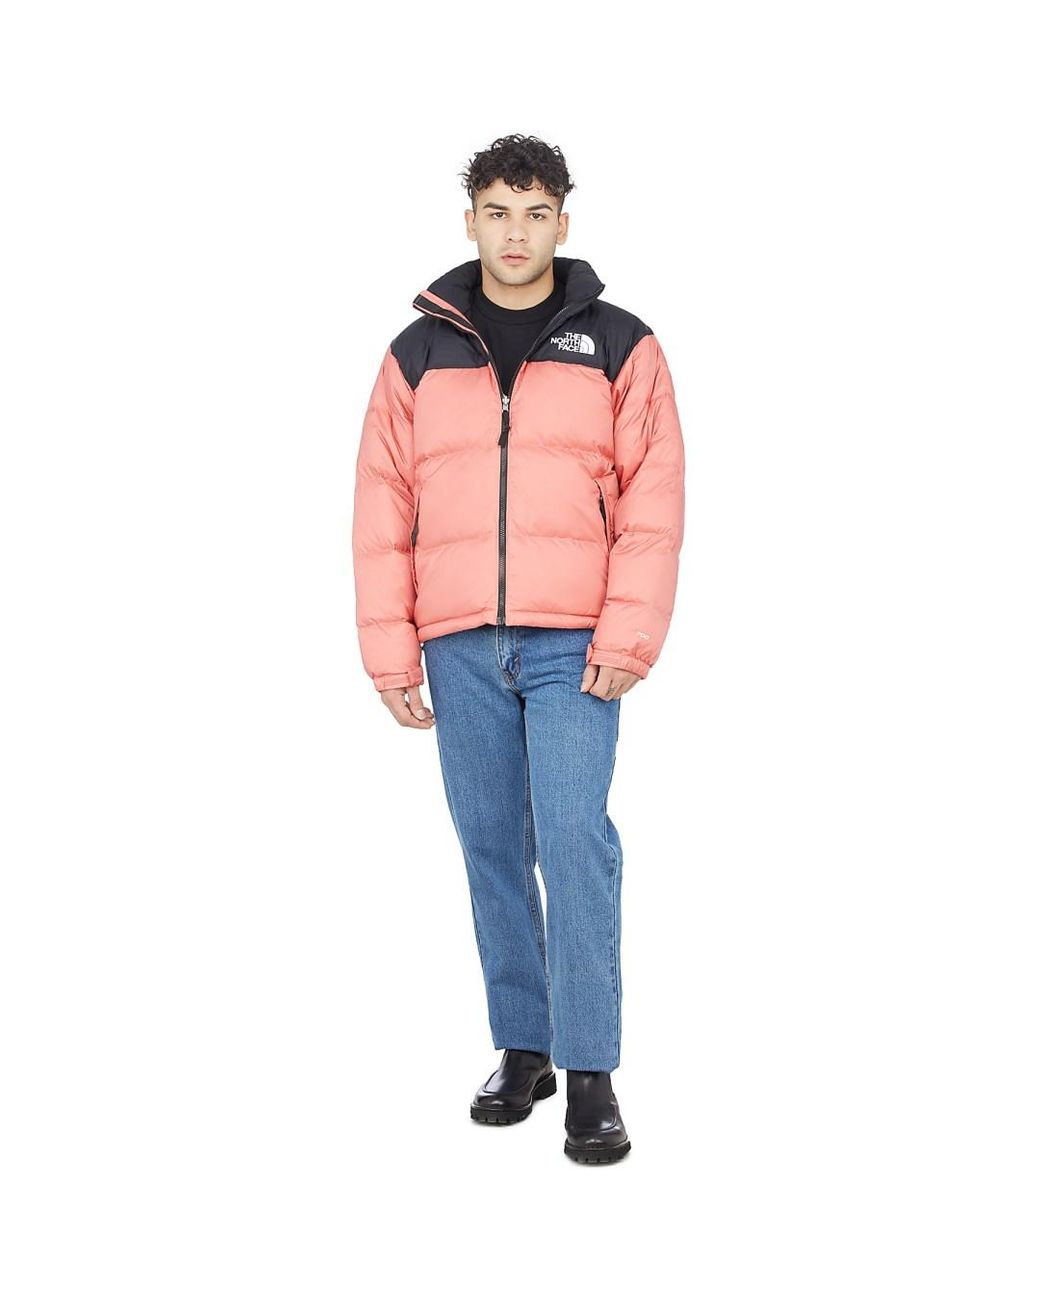 The North Face 1996 Retro Nuptse Jacket in Faded Rose (Pink) for Men - Lyst